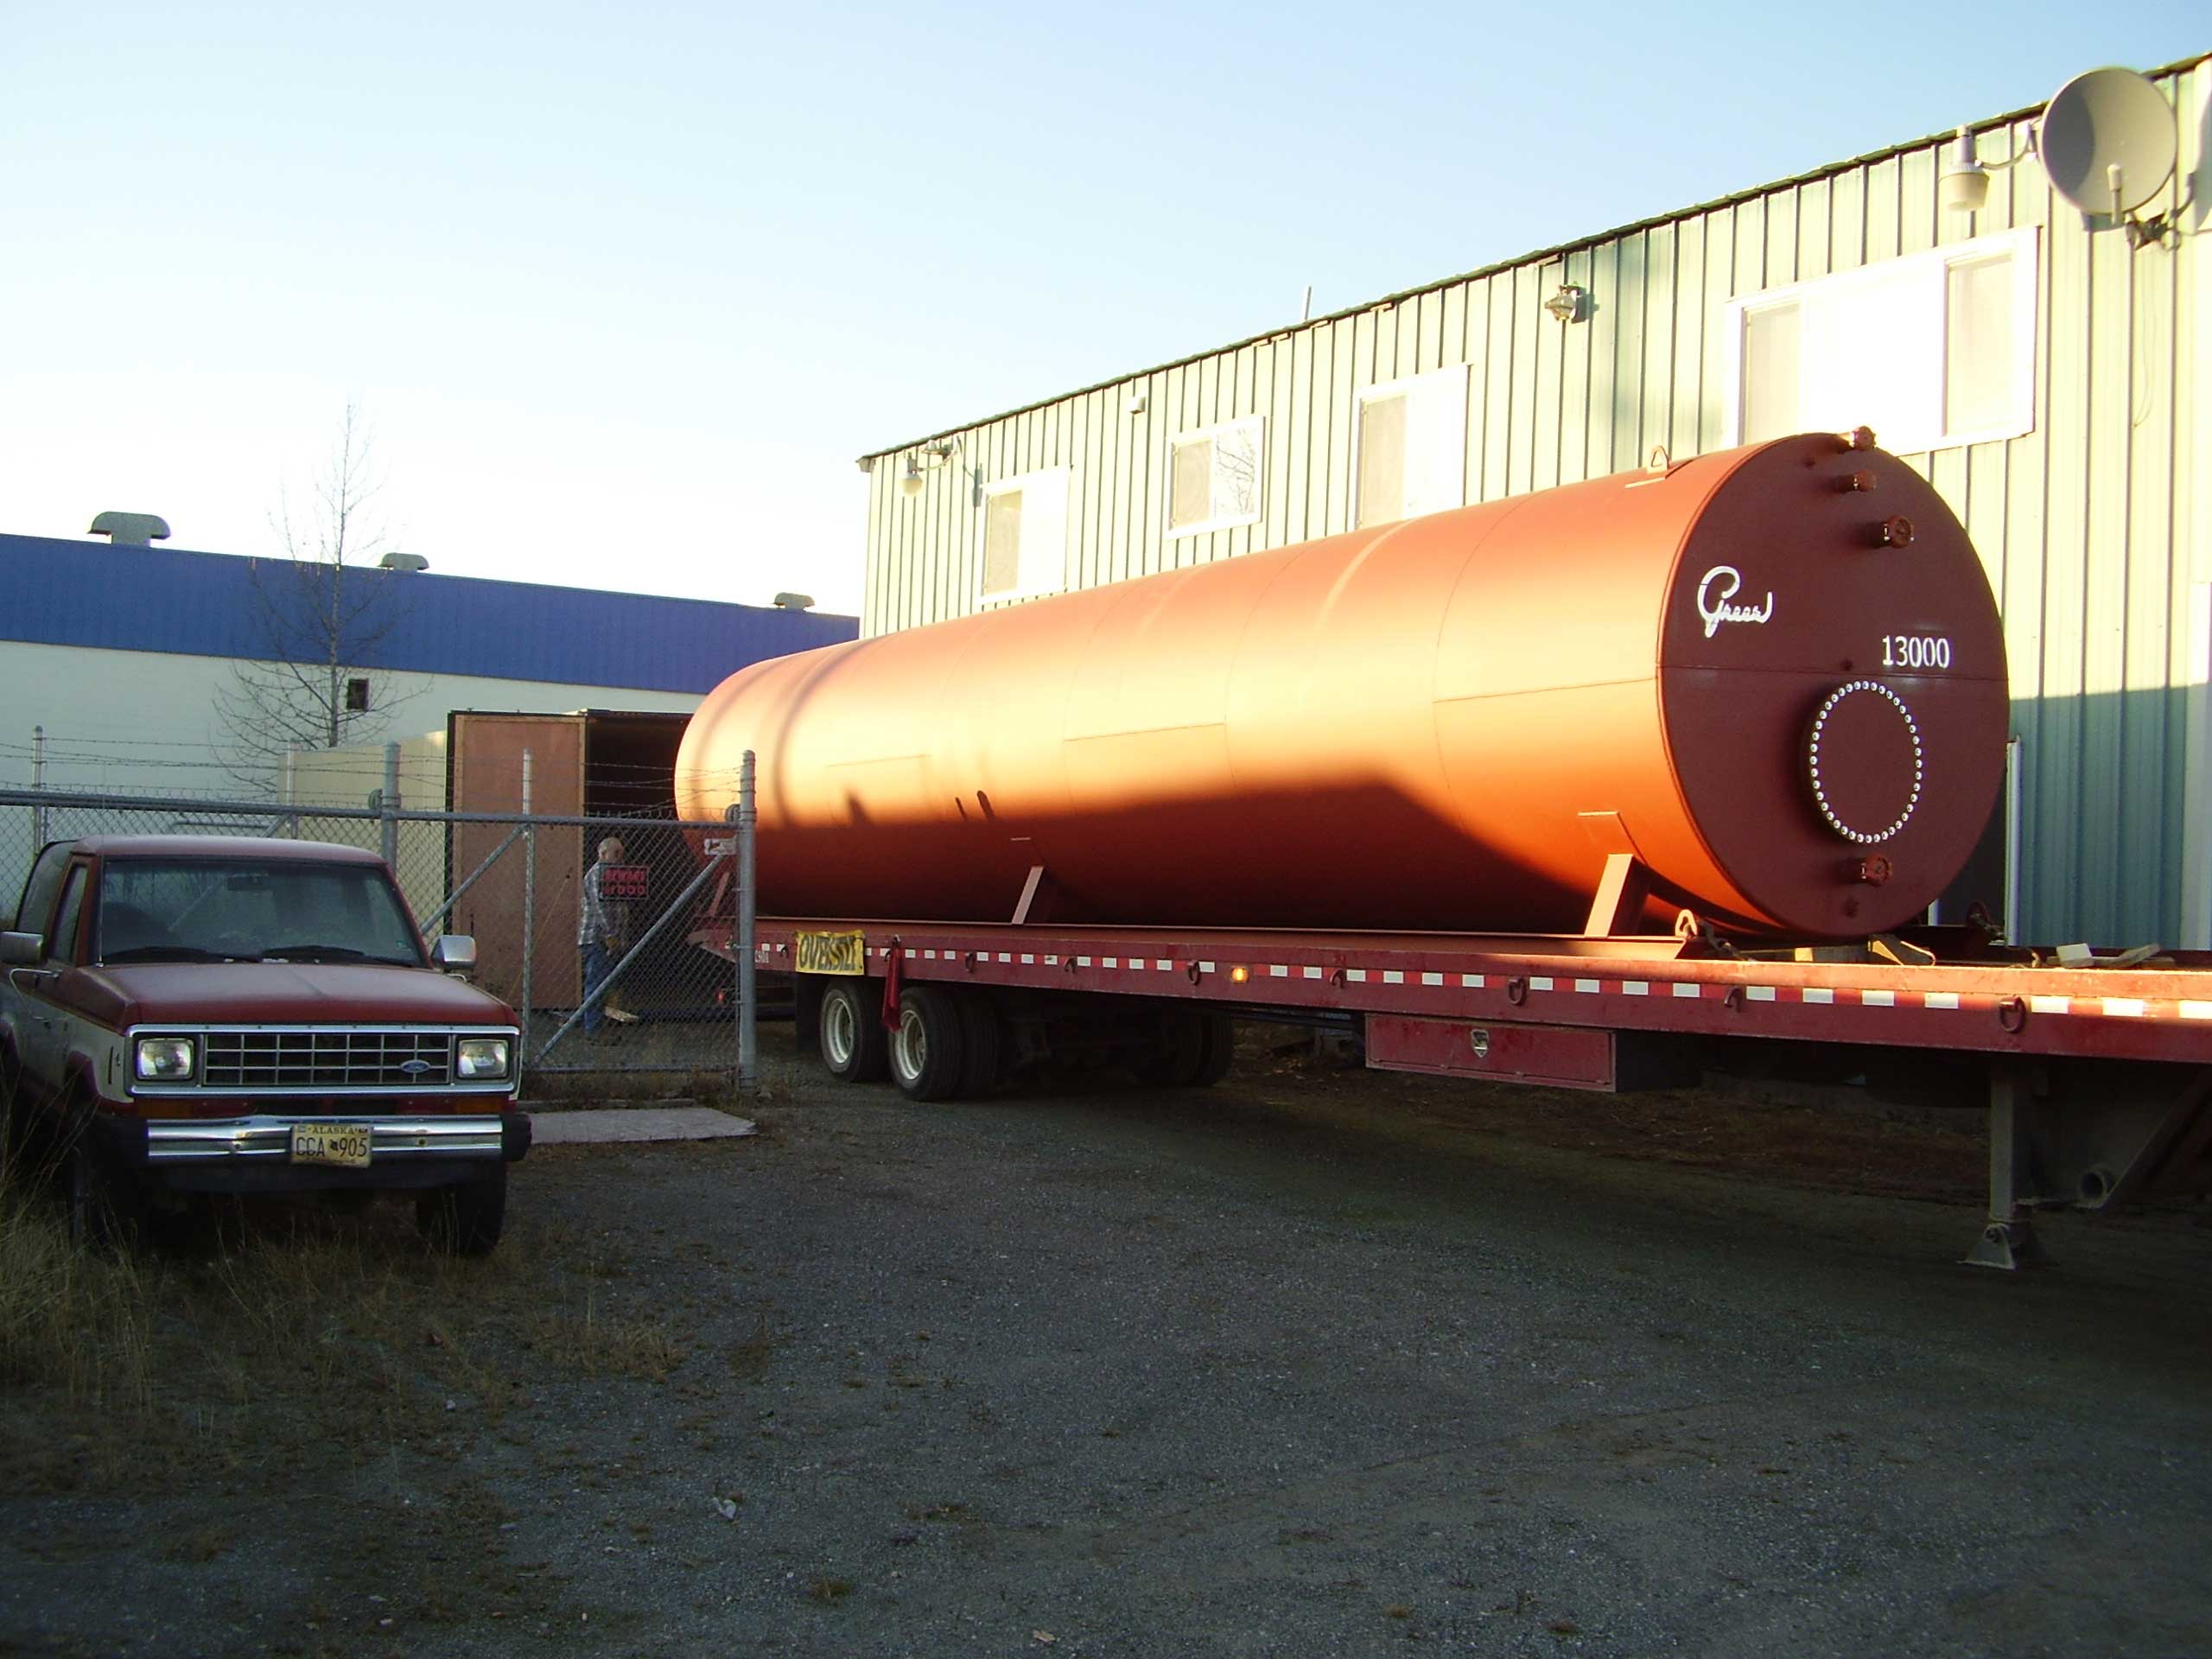 We modified this 53’ container with external insulation to safely store the 13,000 gallon tank. Services included carefully loading the tank into the modified container.